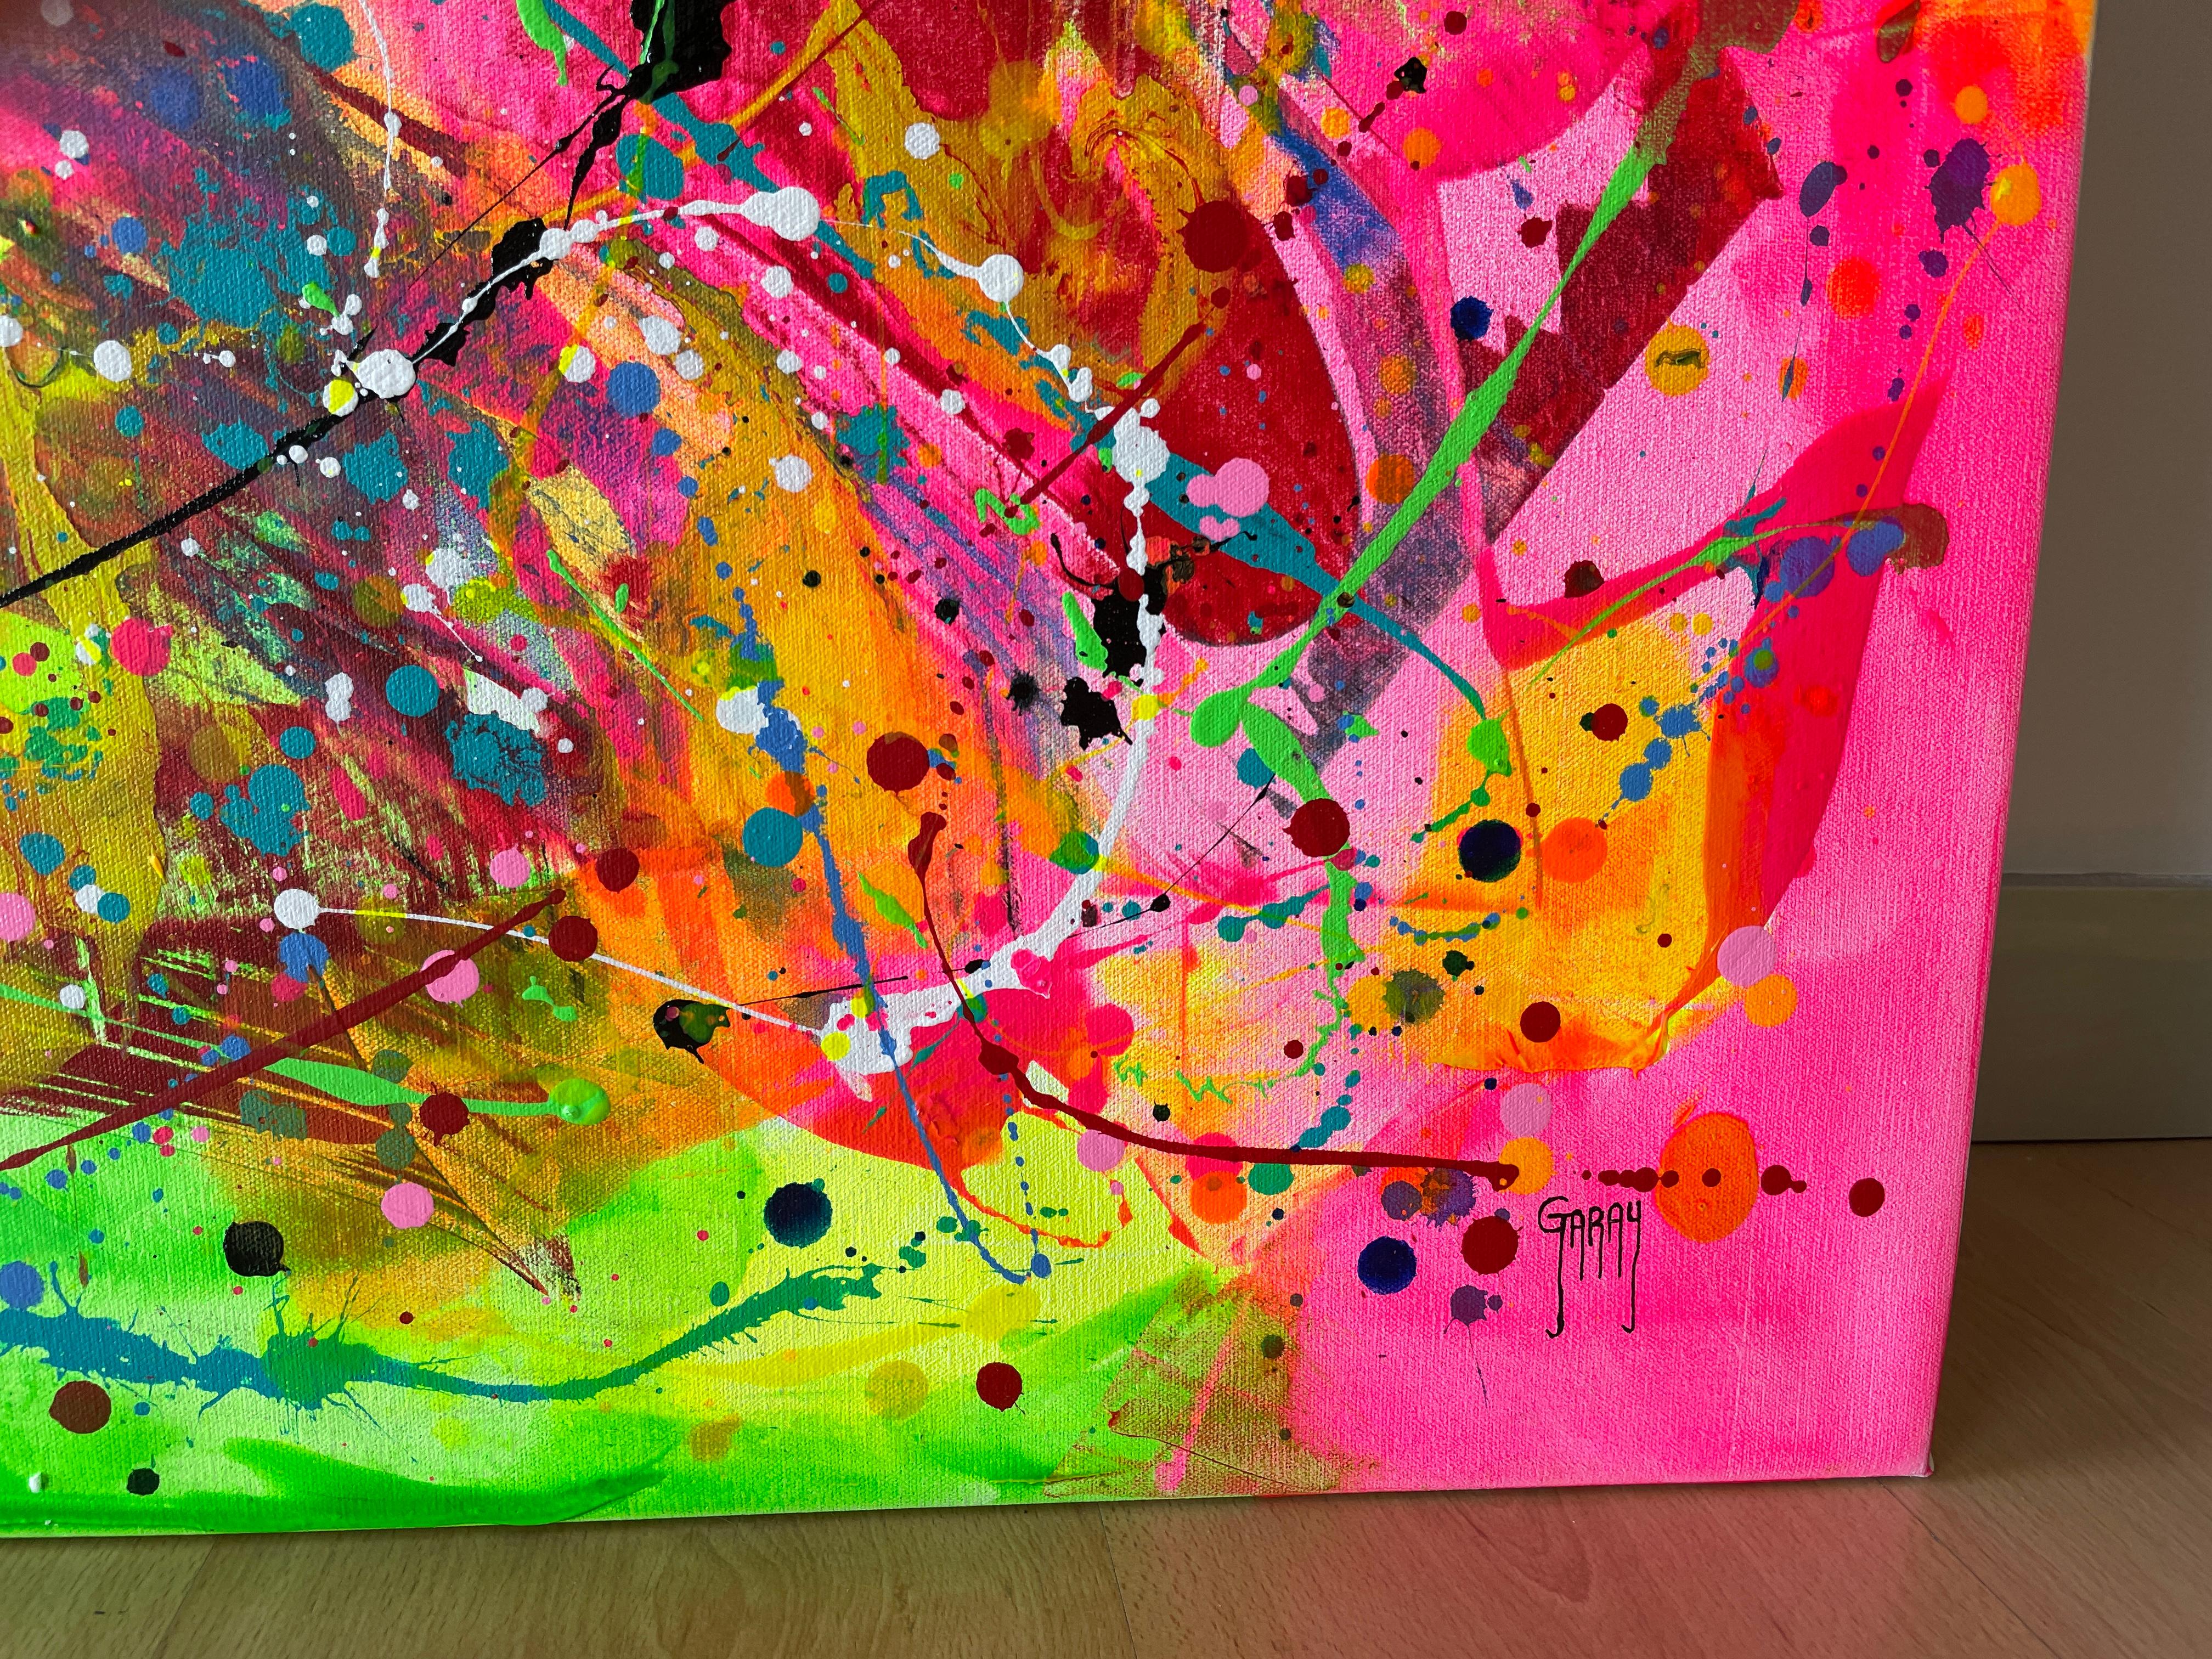 Shipped rolled in a tube without a frame

Acrylic on Canvas

This XL size abstract painting is an explosion of color and movement. The dynamic technique used by the artist has created a work full of life and energy.

The painting is made up of a